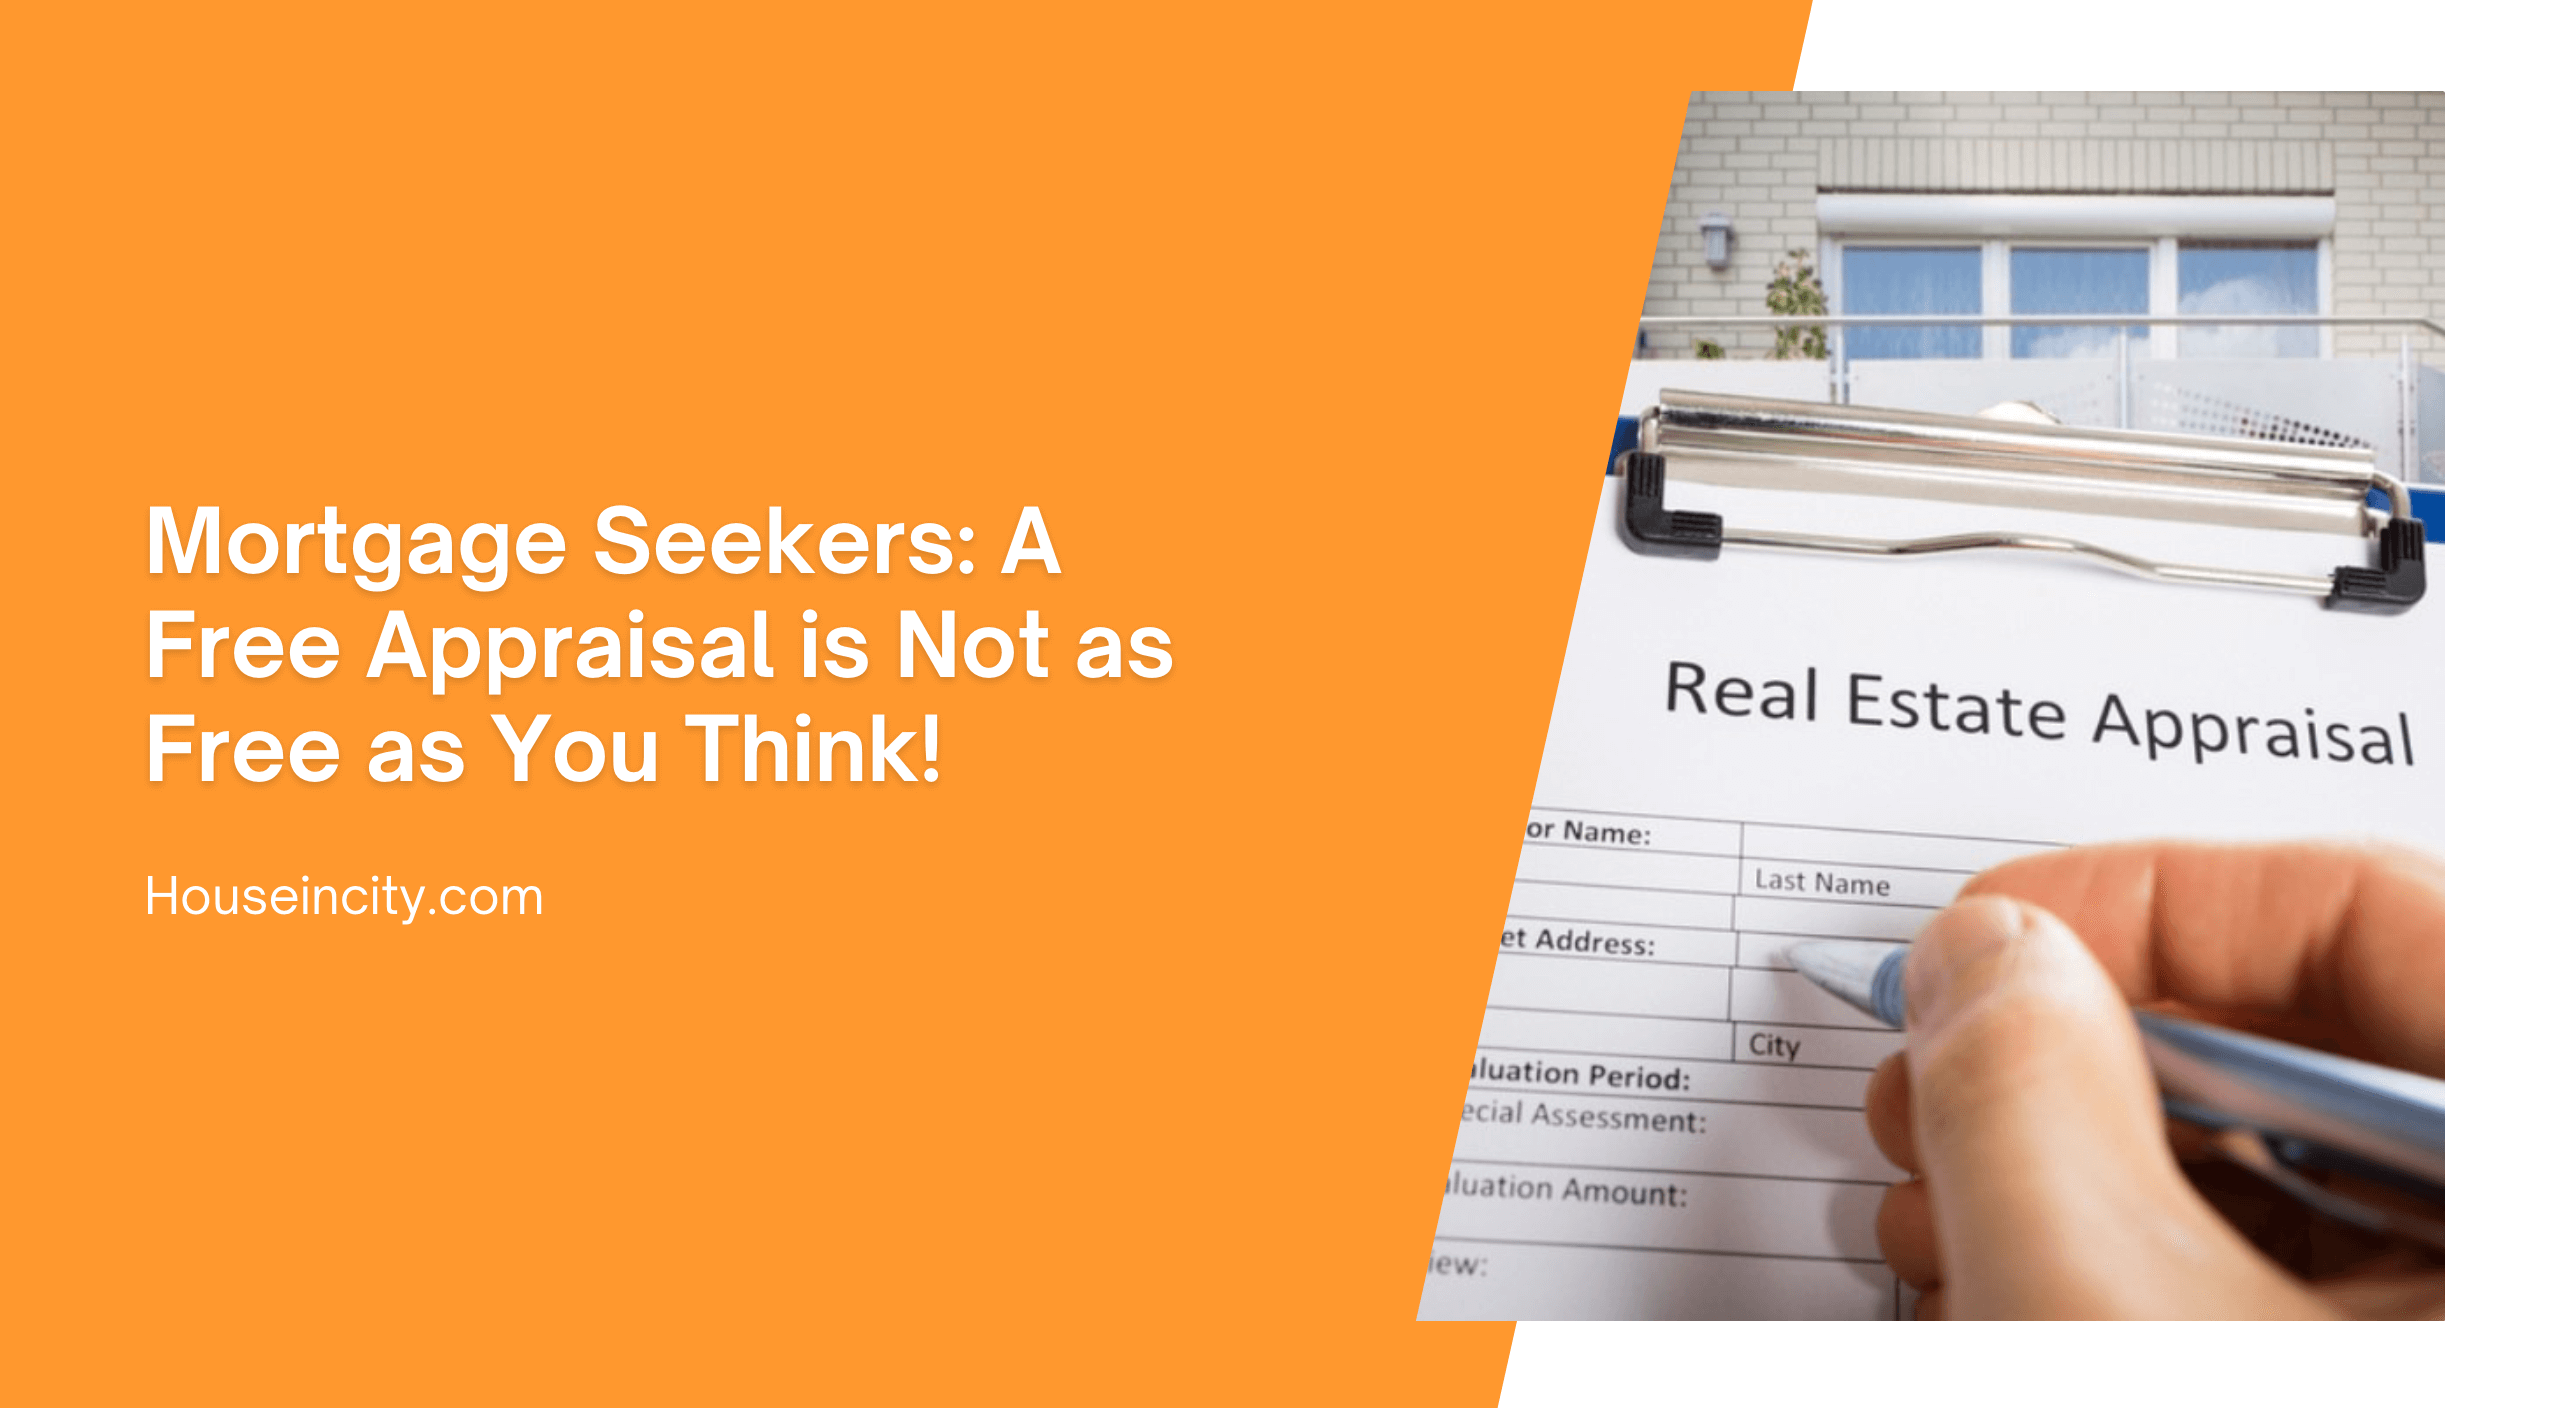 Mortgage Seekers: A Free Appraisal is Not as Free as You Think!